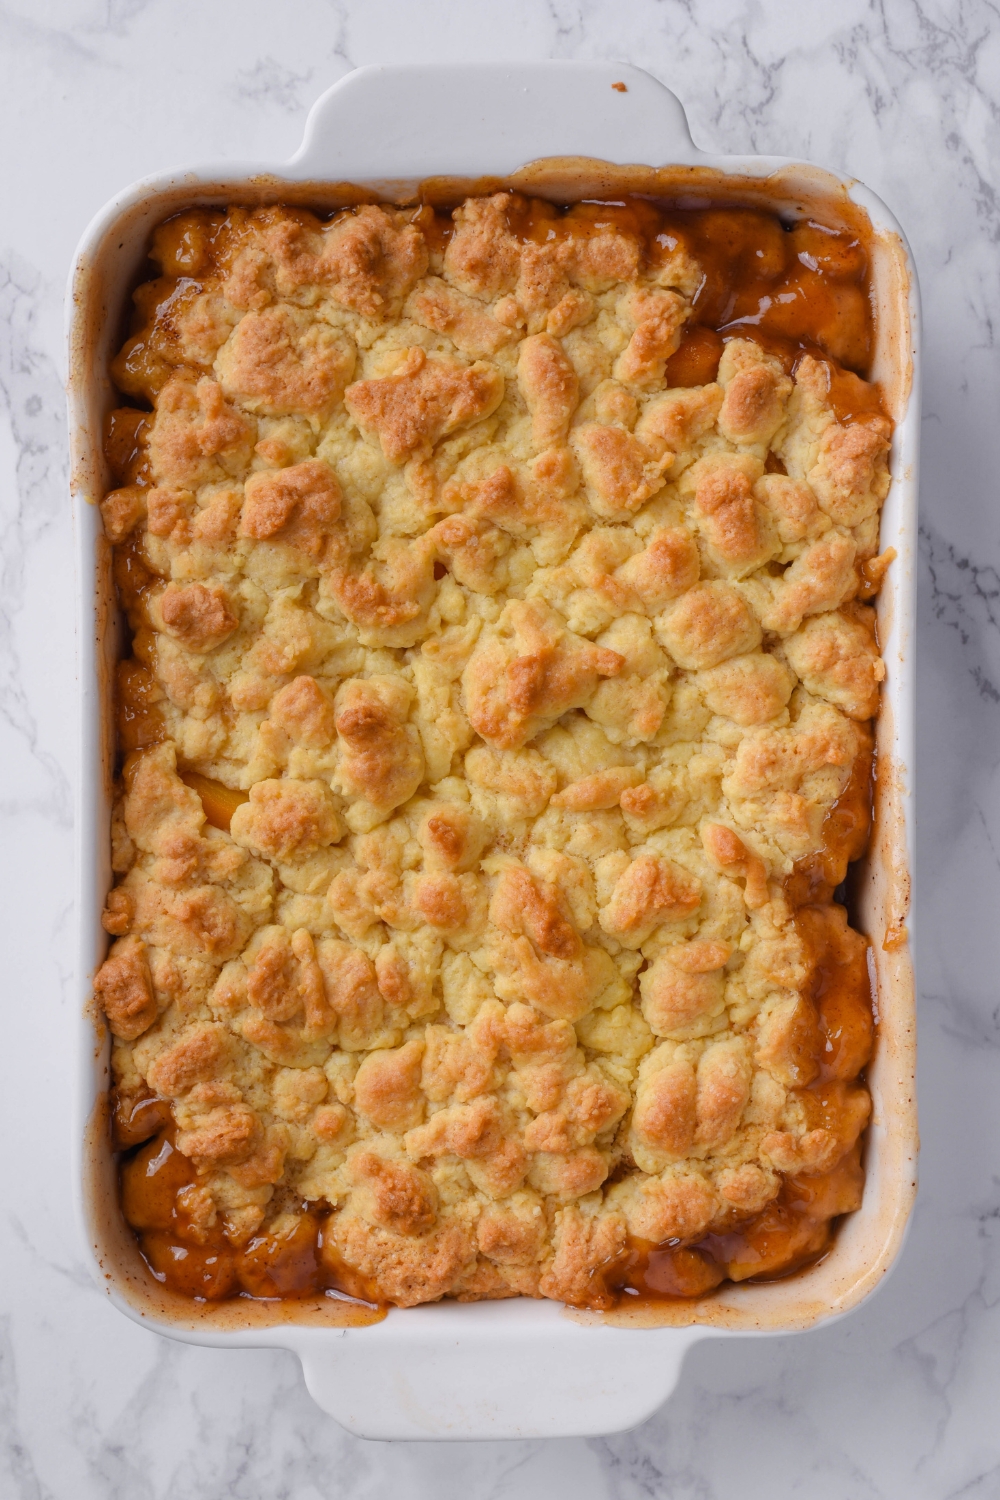 A baking dish with baked peach cobbler in it.